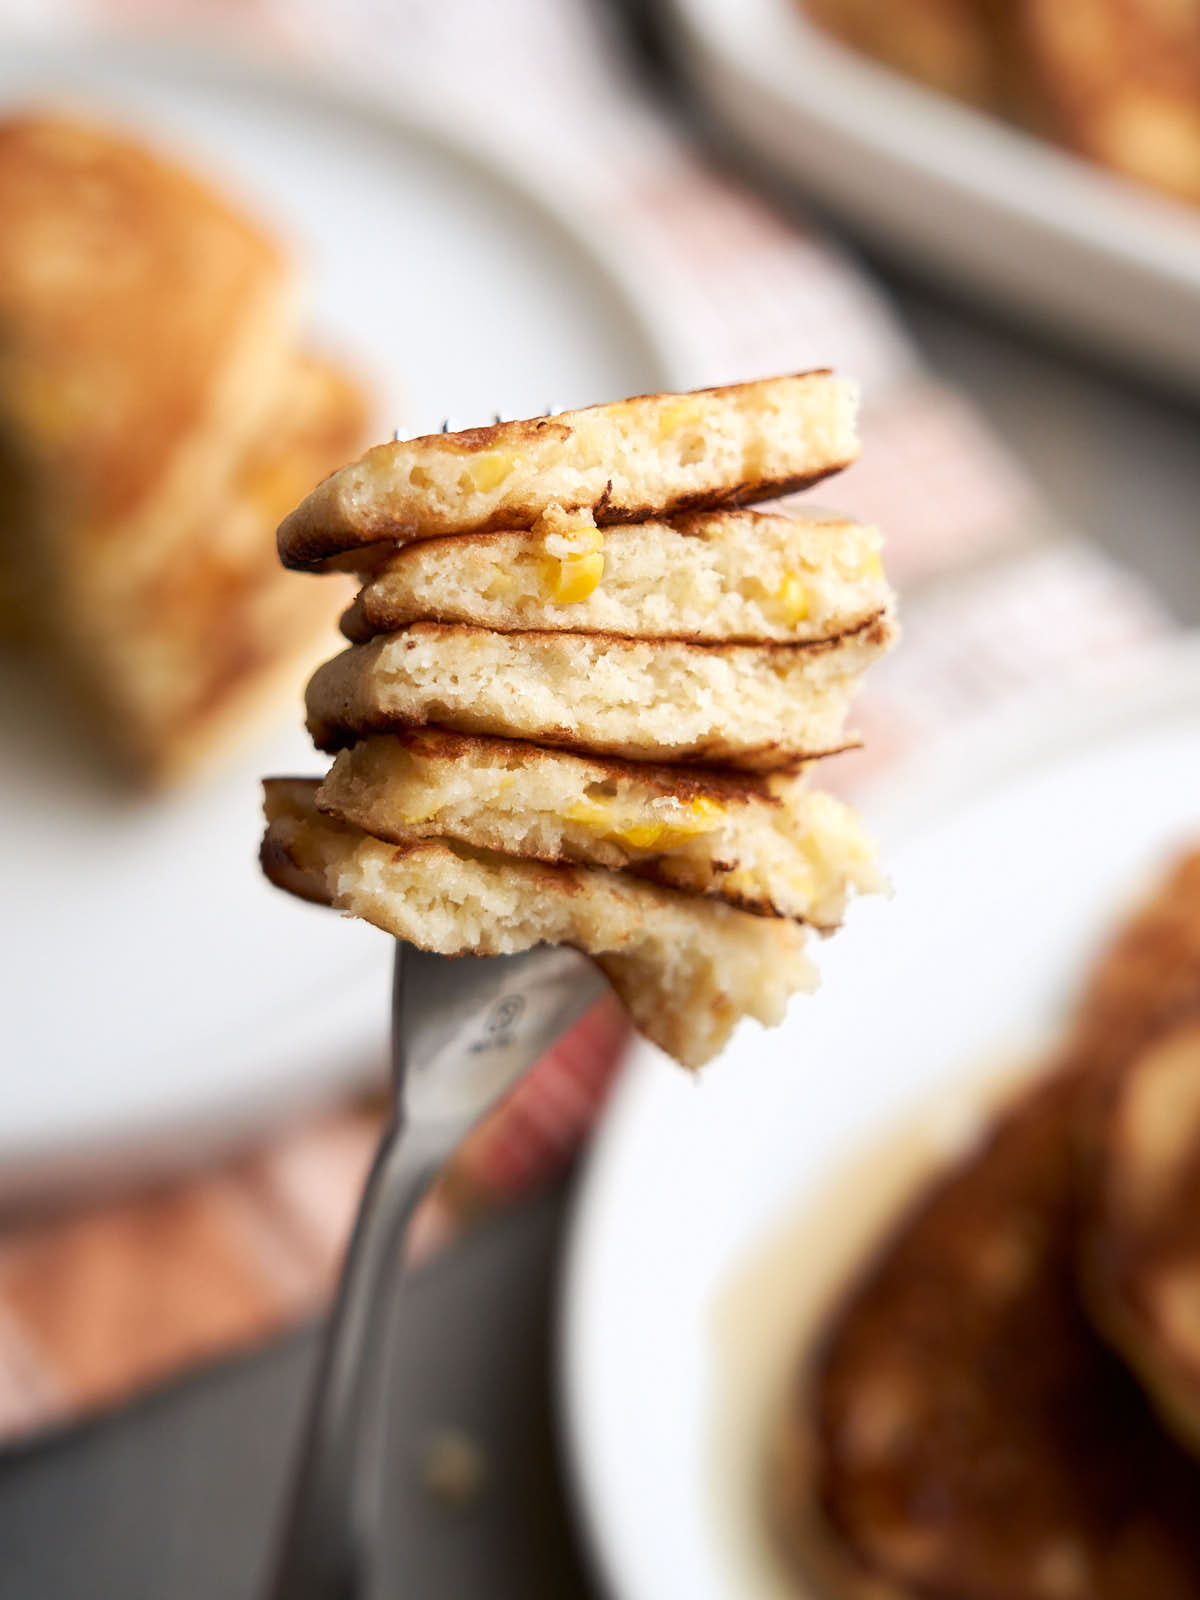 Canned cream corn pancakes stacked on a fork